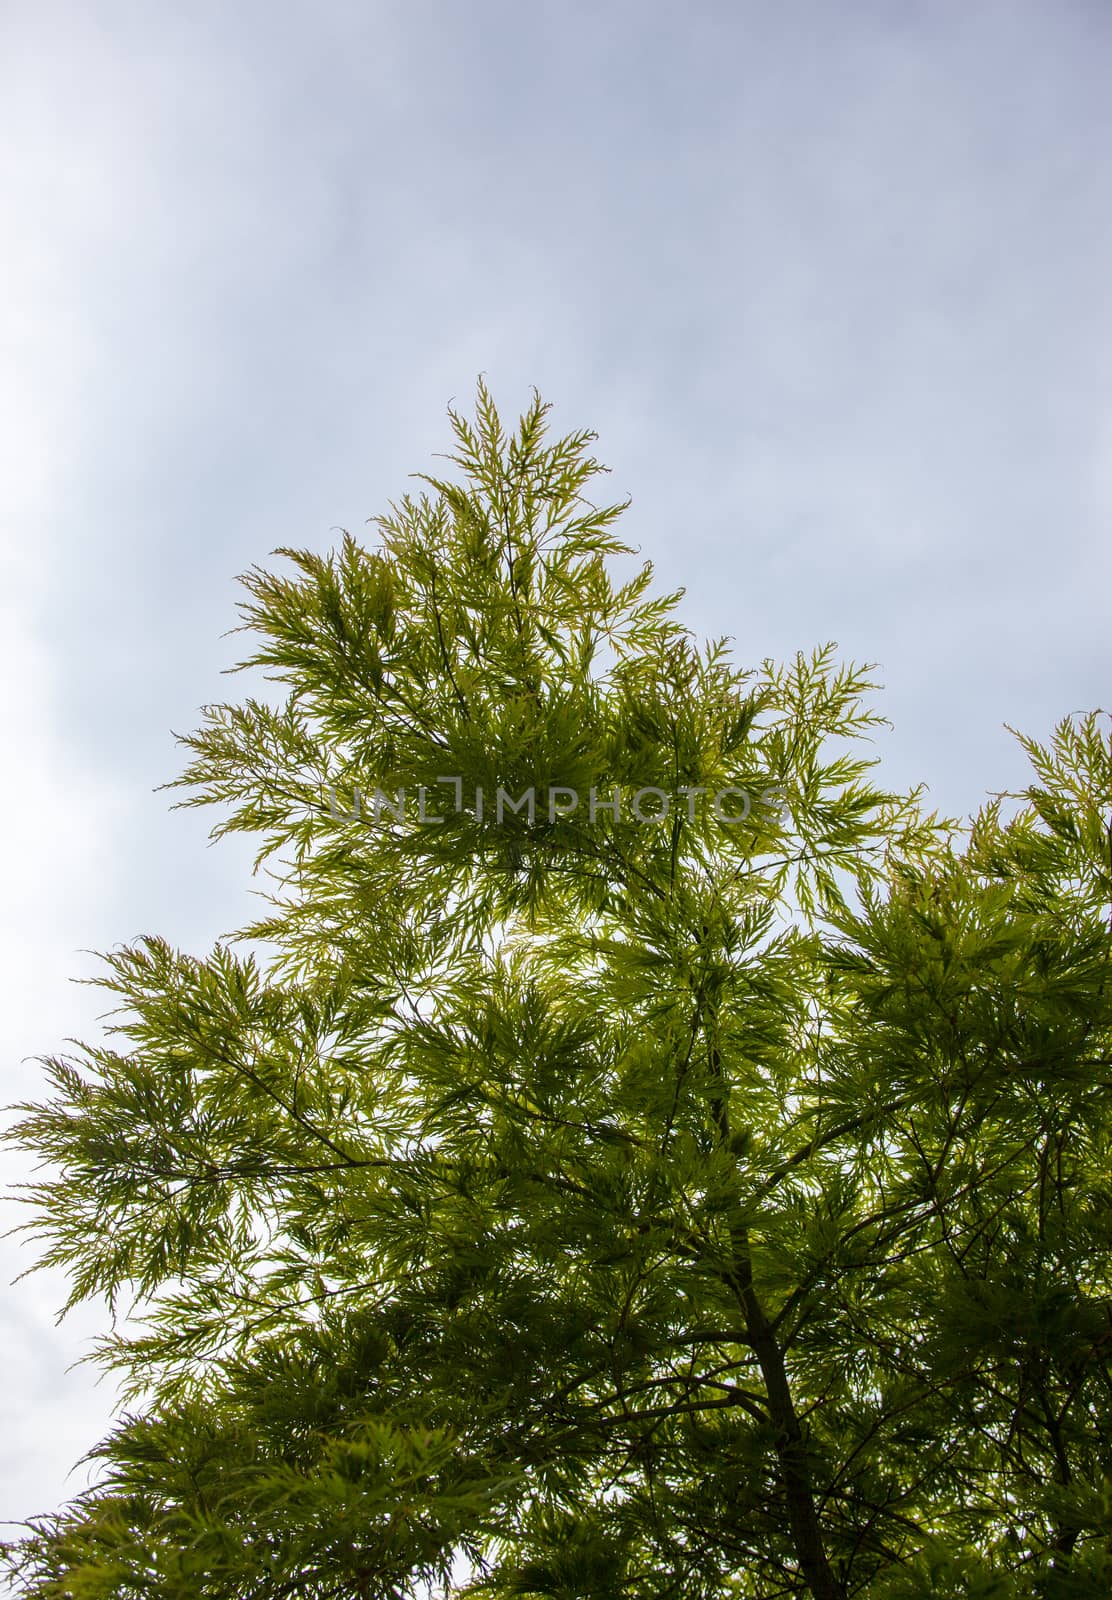 Green leaves on the branches of the Japanese maple (Acer palmatum)